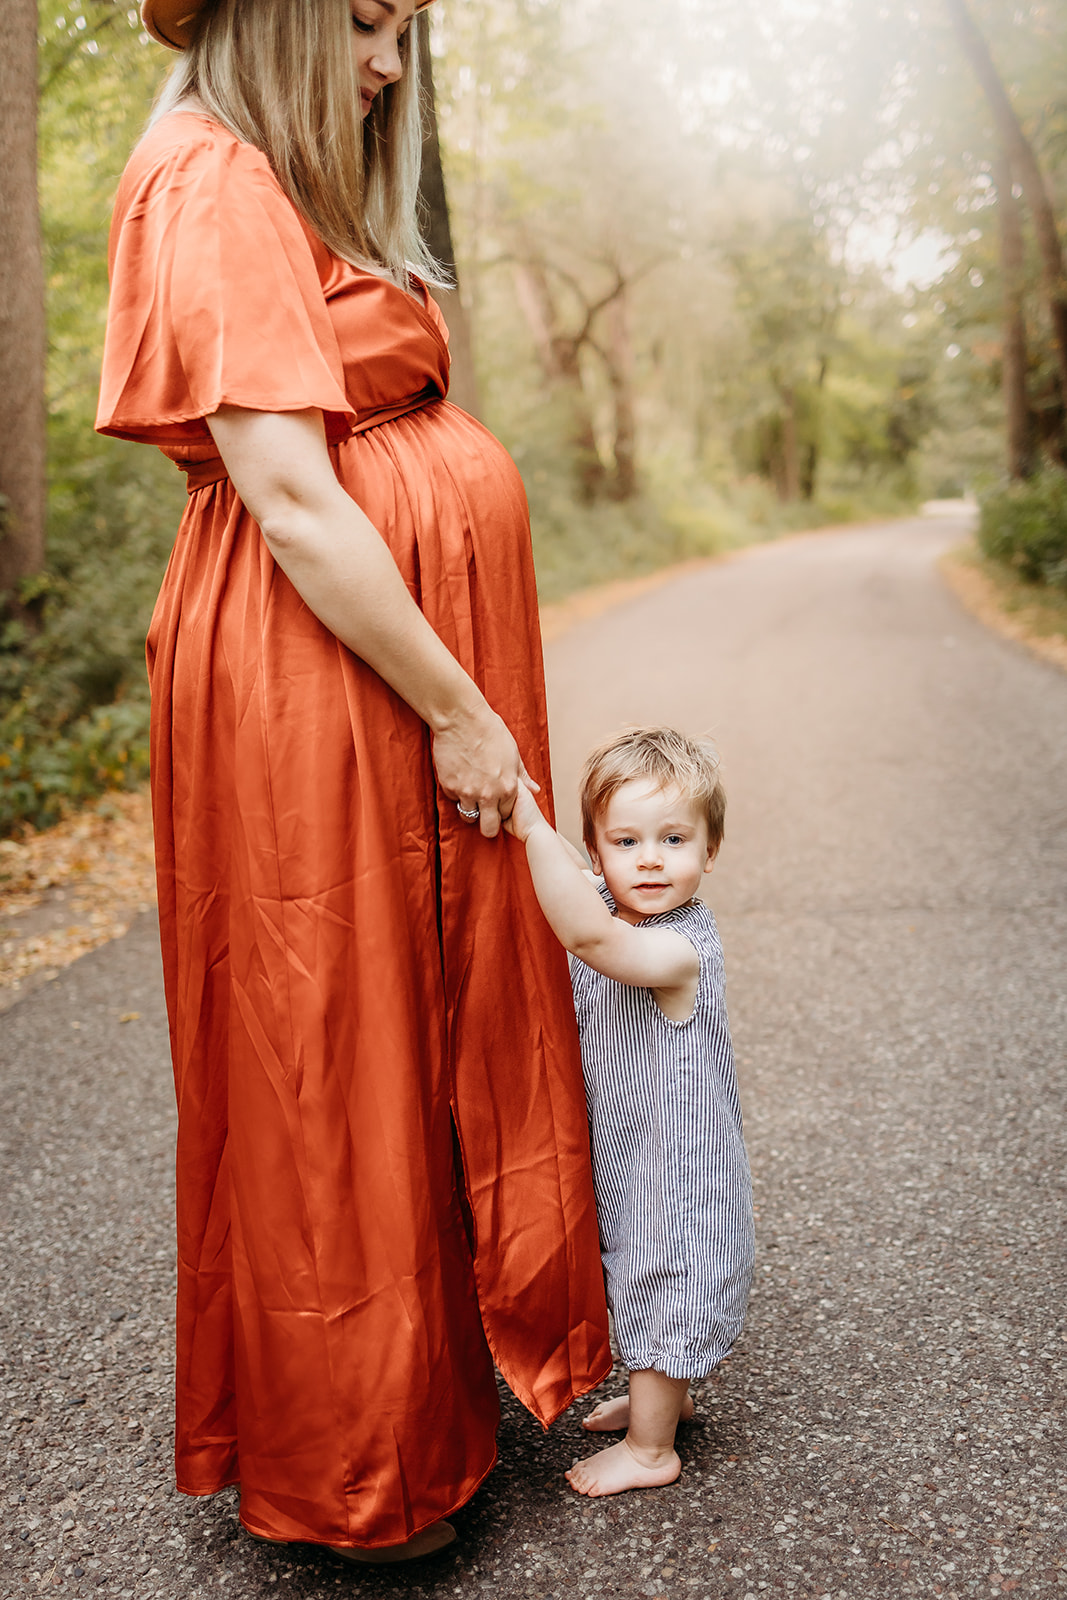 A pregnant mother in a red dress stands with her toddler son in a park sidewalk after Prenatal Yoga Eau Claire